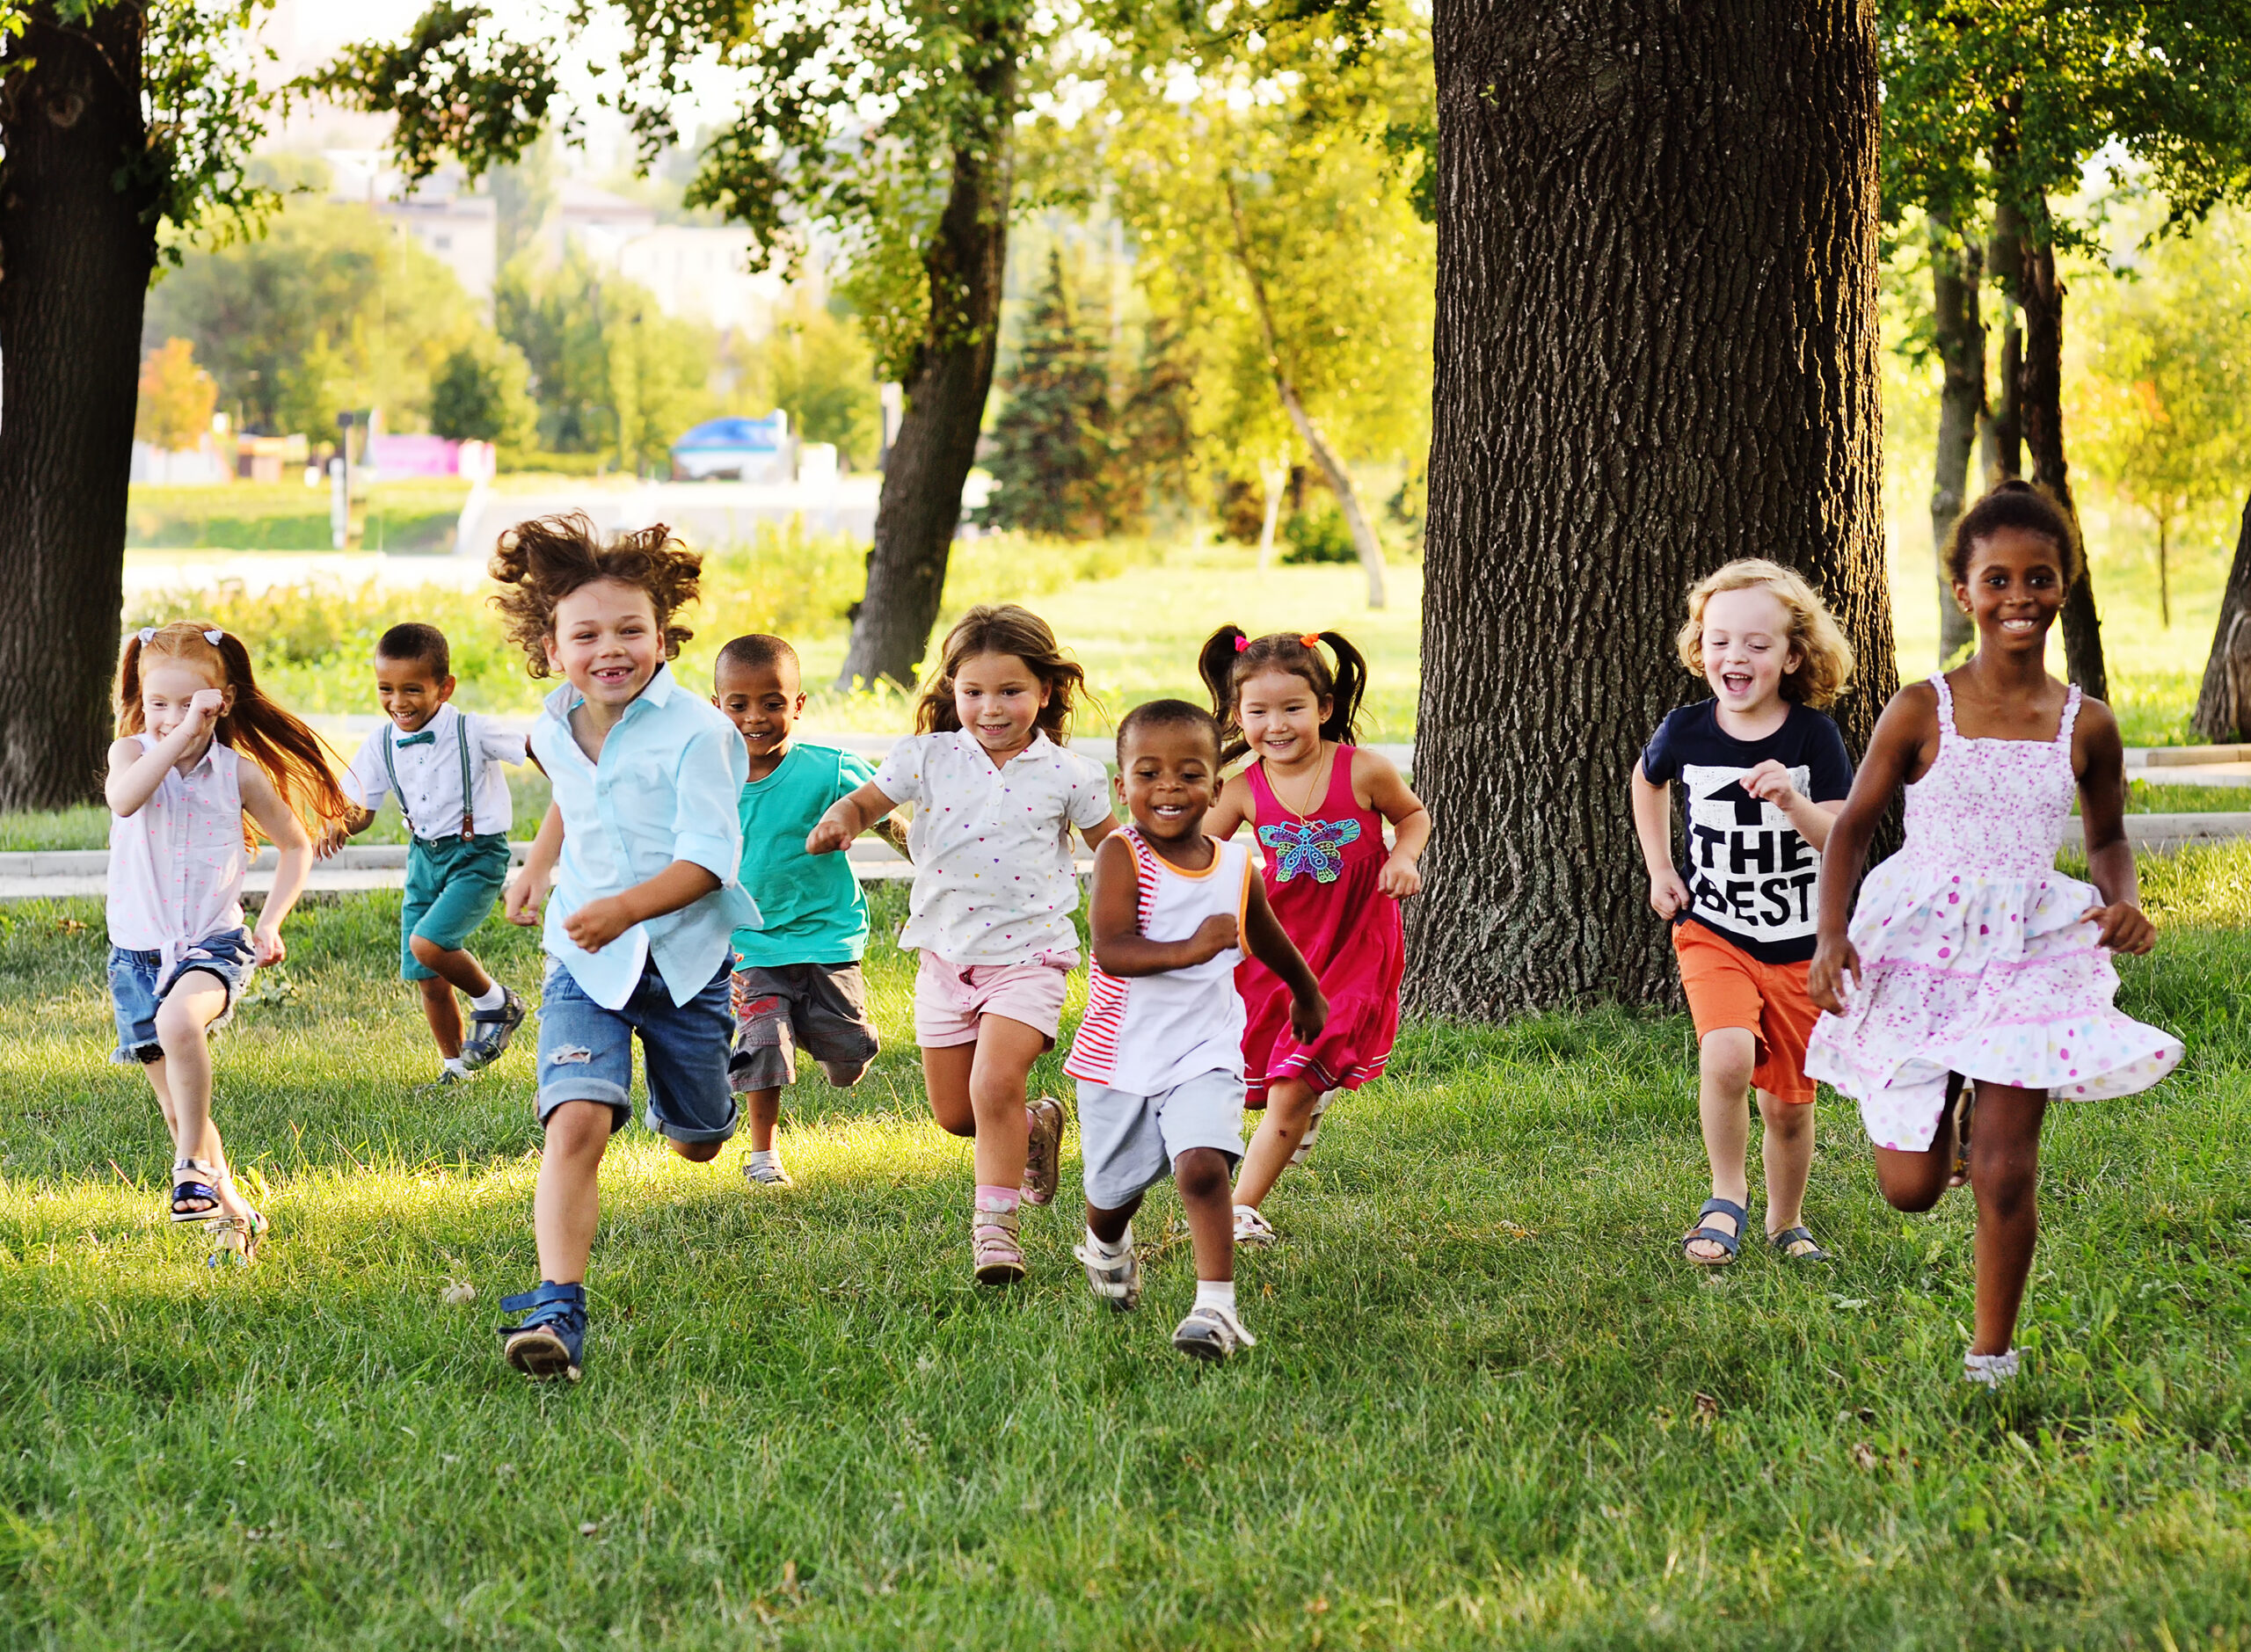 A group of happy children running through the park on a sunny day.